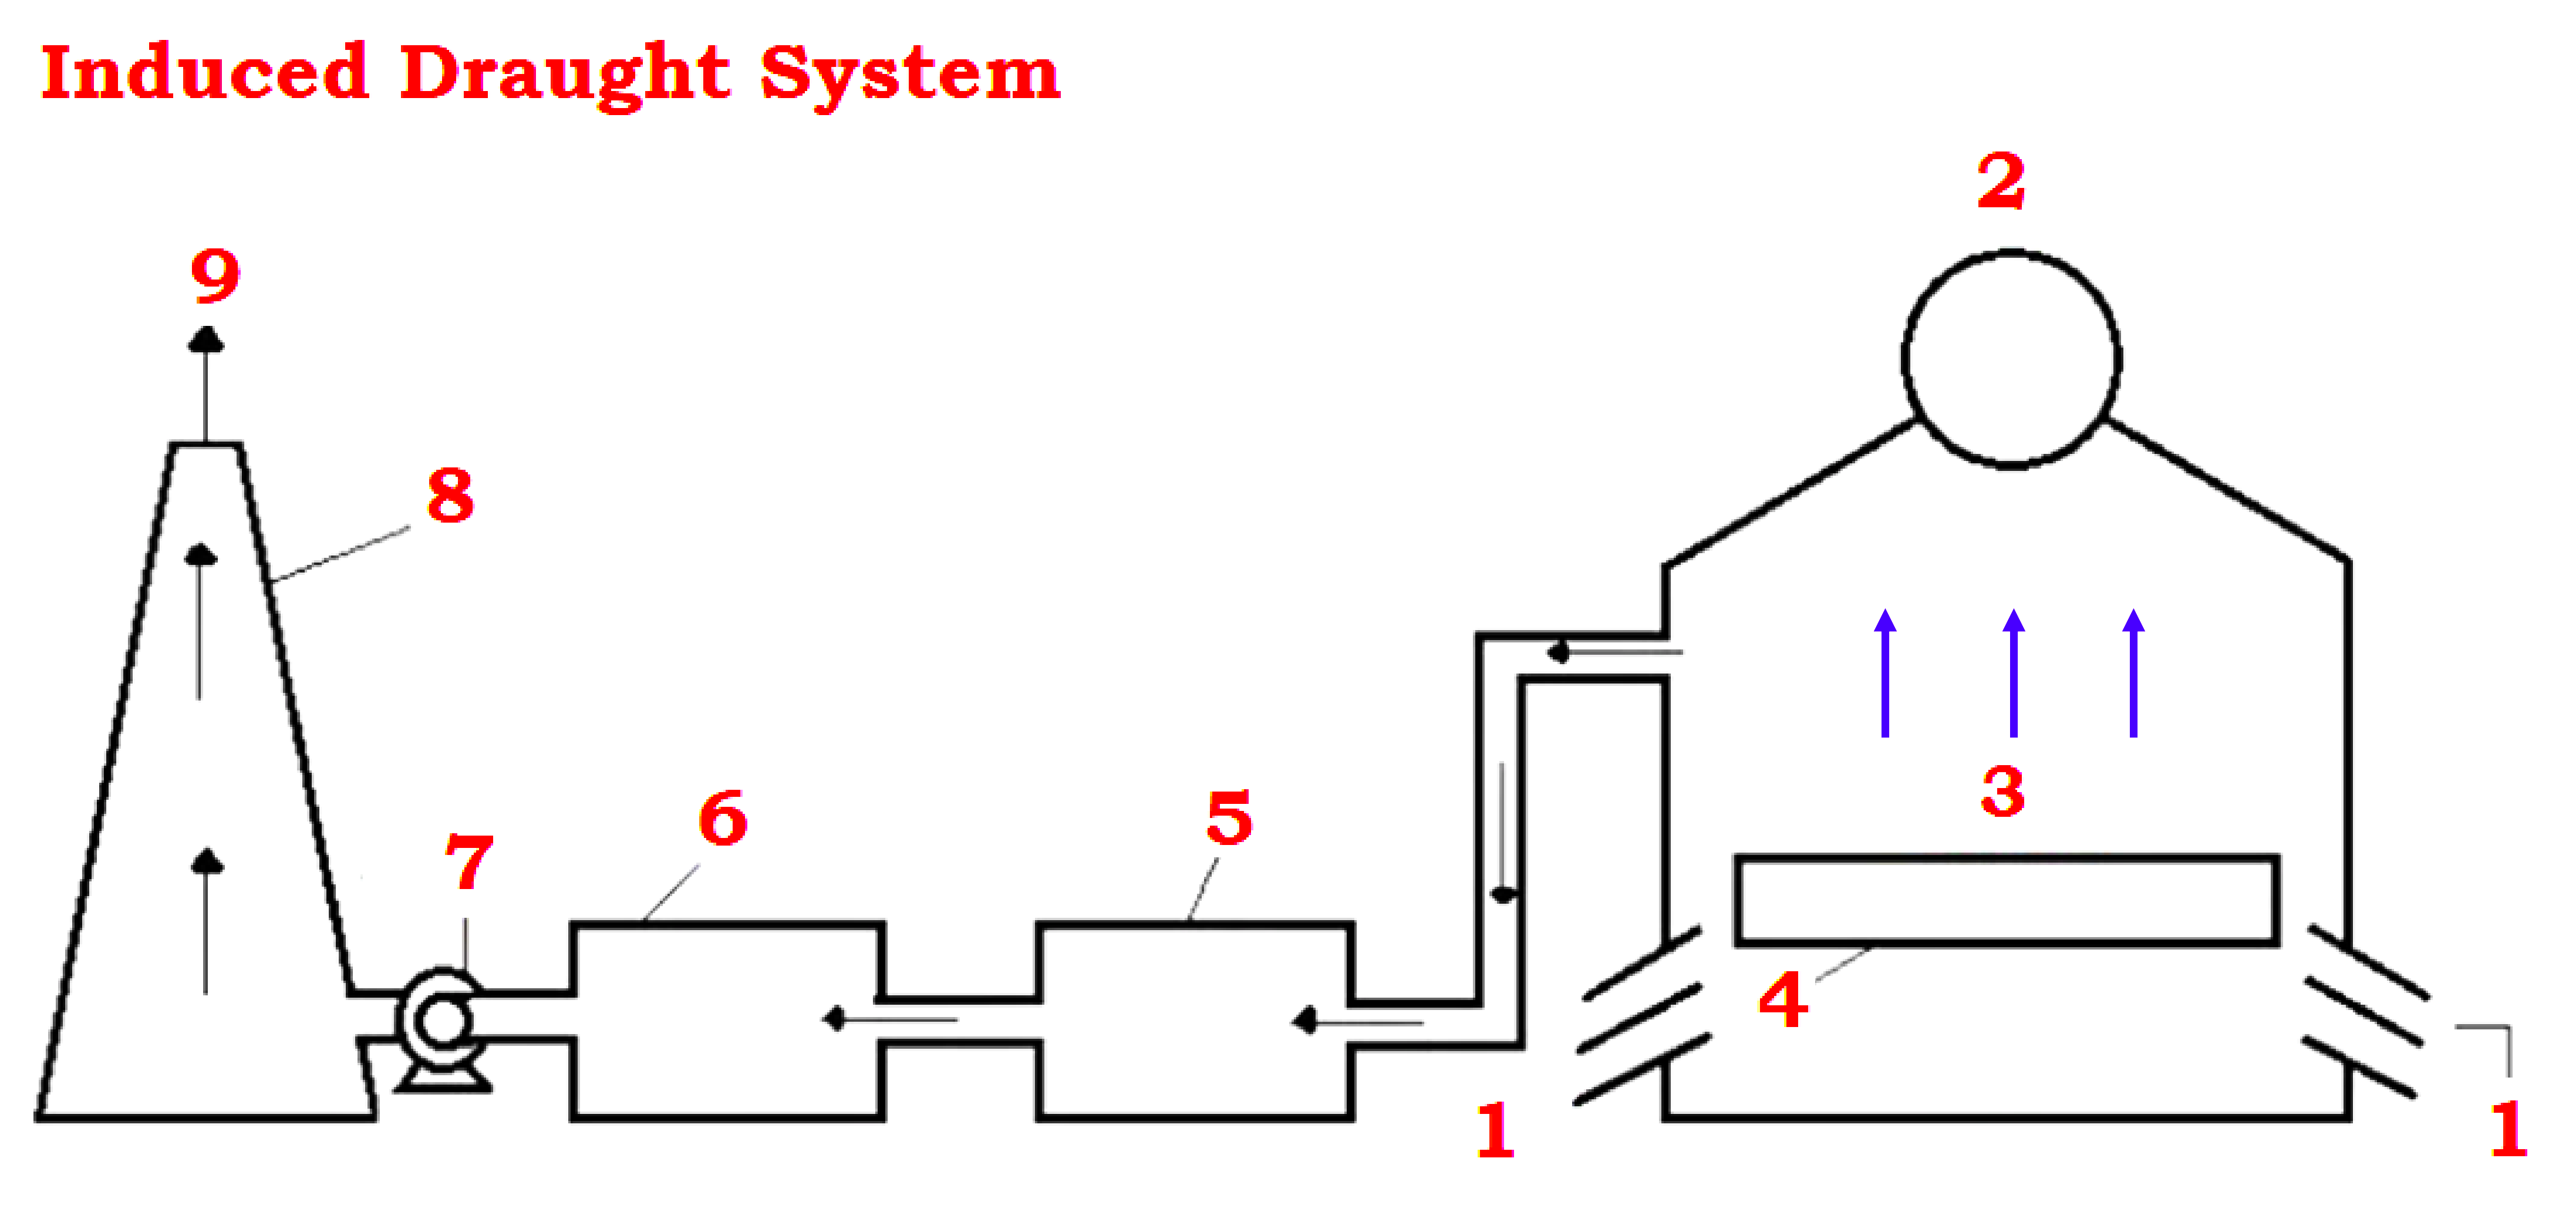 Induced Draught System